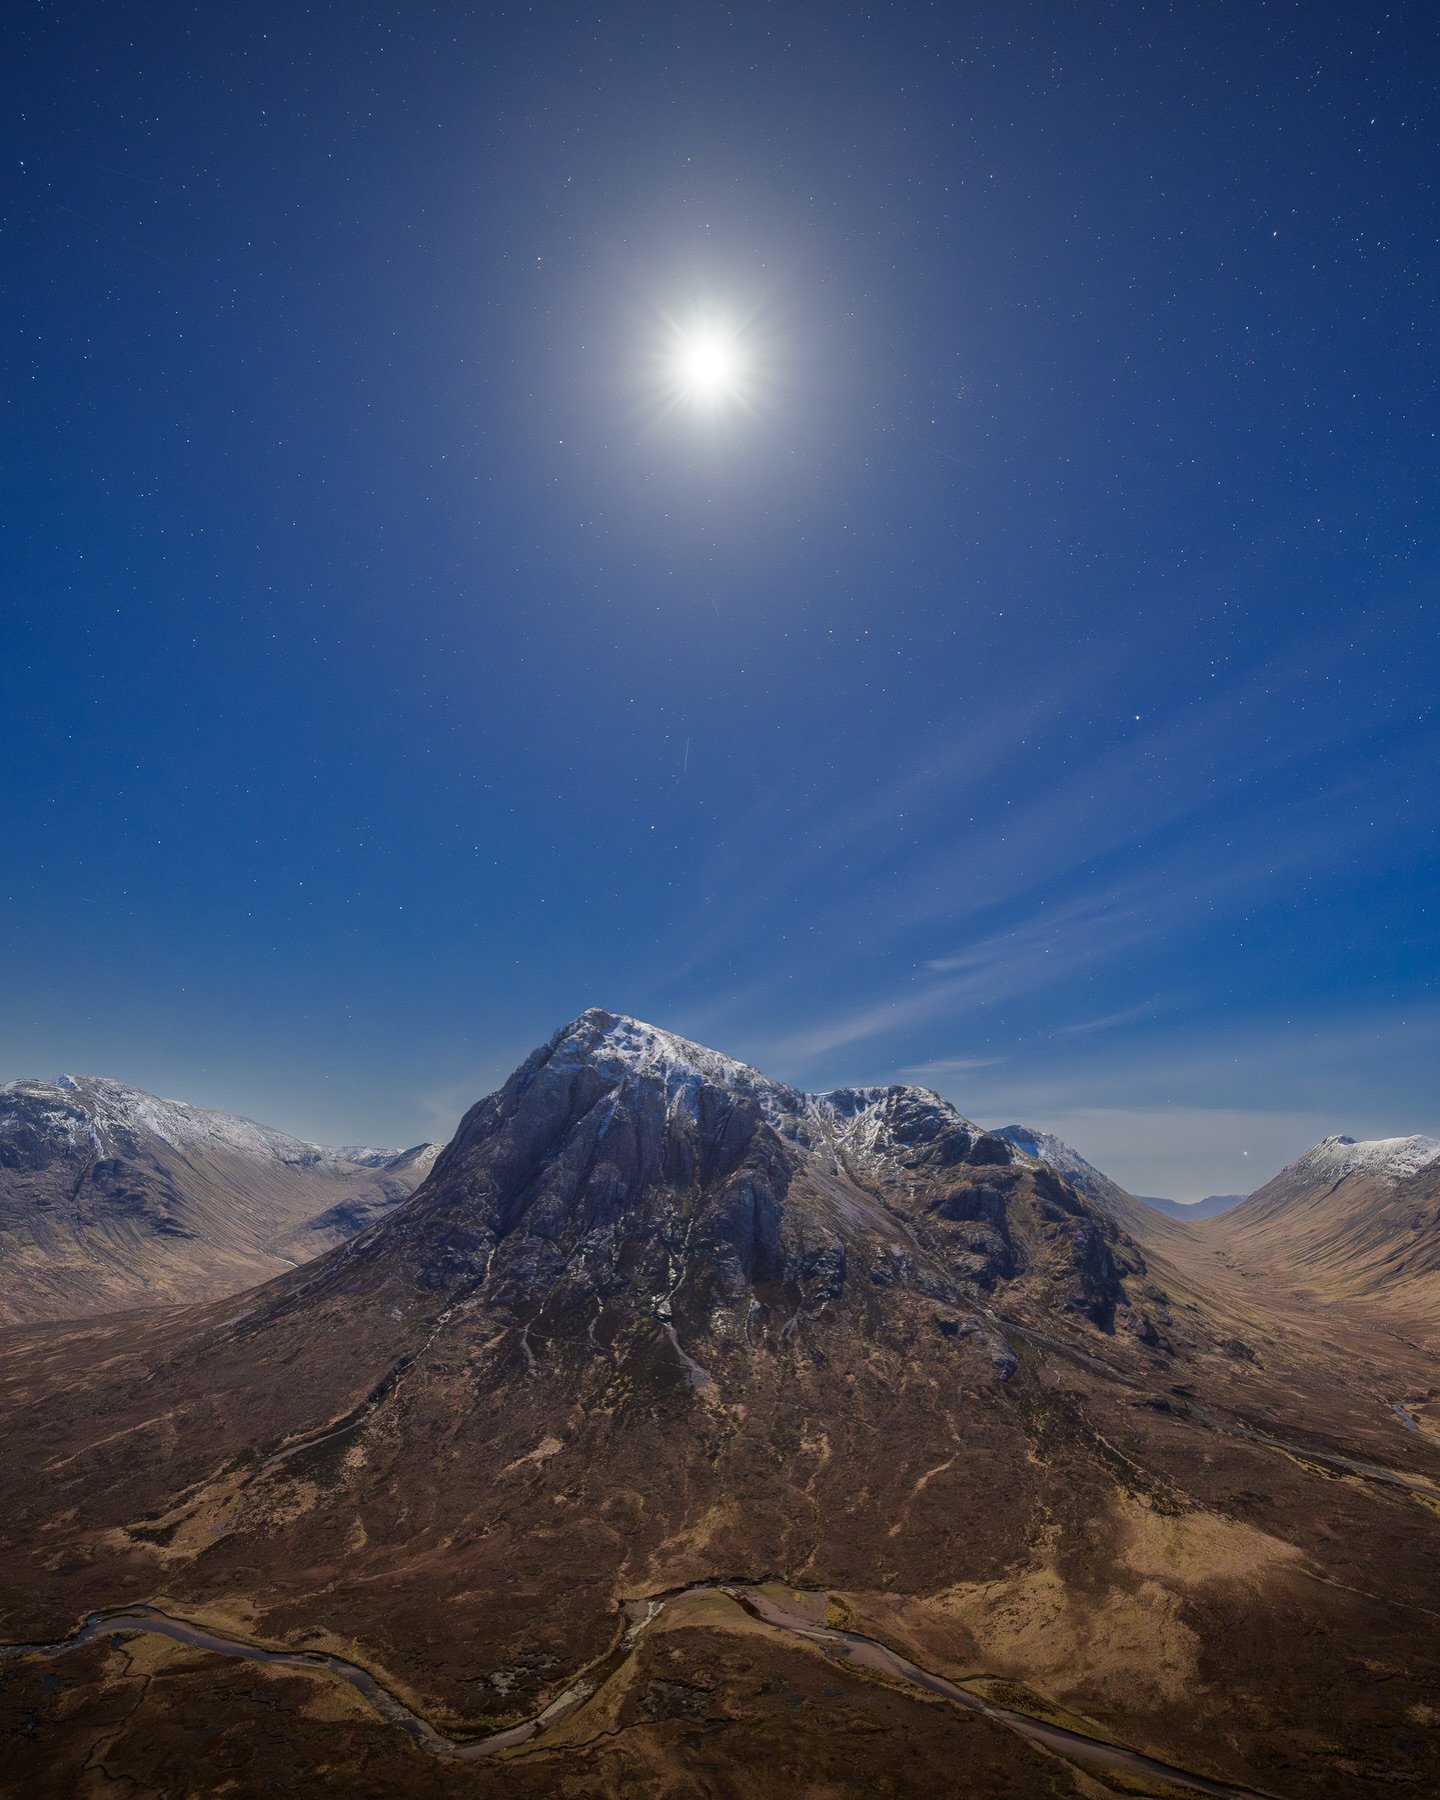 This shot was taken near the summit of Beinn a&rsquo;Chrulaiste, where the moon illuminates Buachaille Etive M&oacute;r against a backdrop of stars ✨ 

There was hardly a breath of wind and a small mouse kept us company, hopping from rock to rock. Th